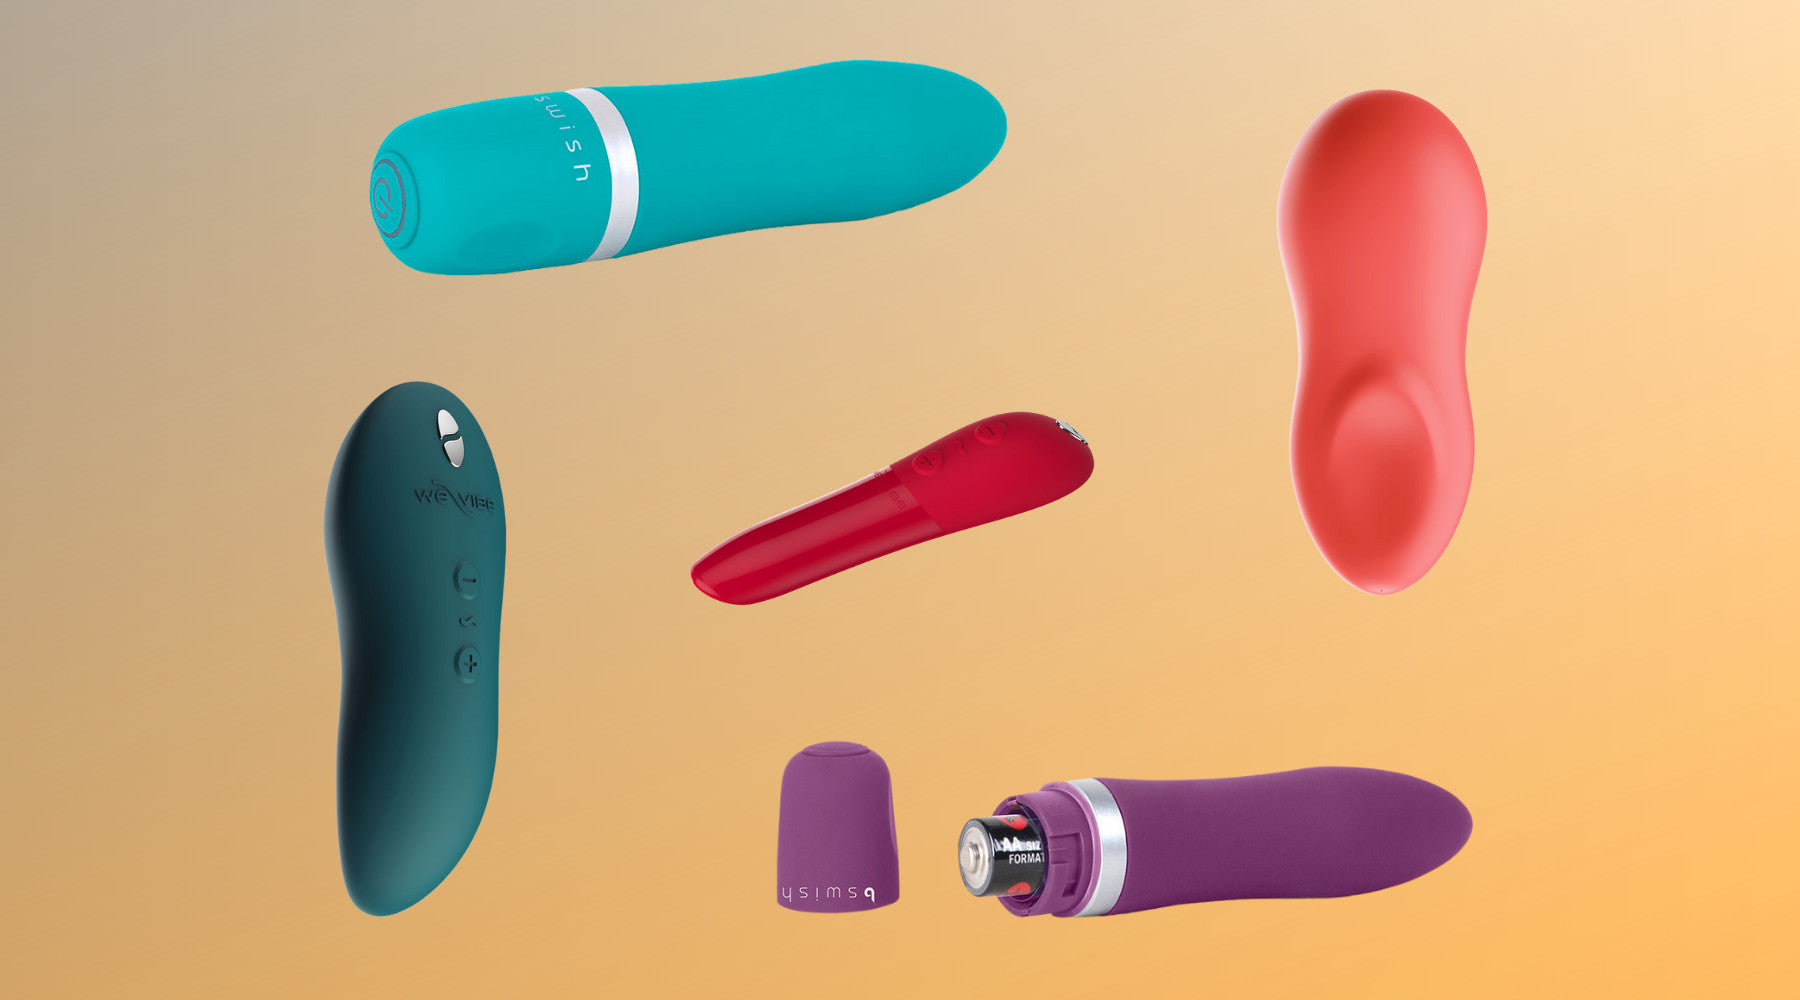 Image of different types of bullet vibrators, some are rechargeable, some are battery powered.